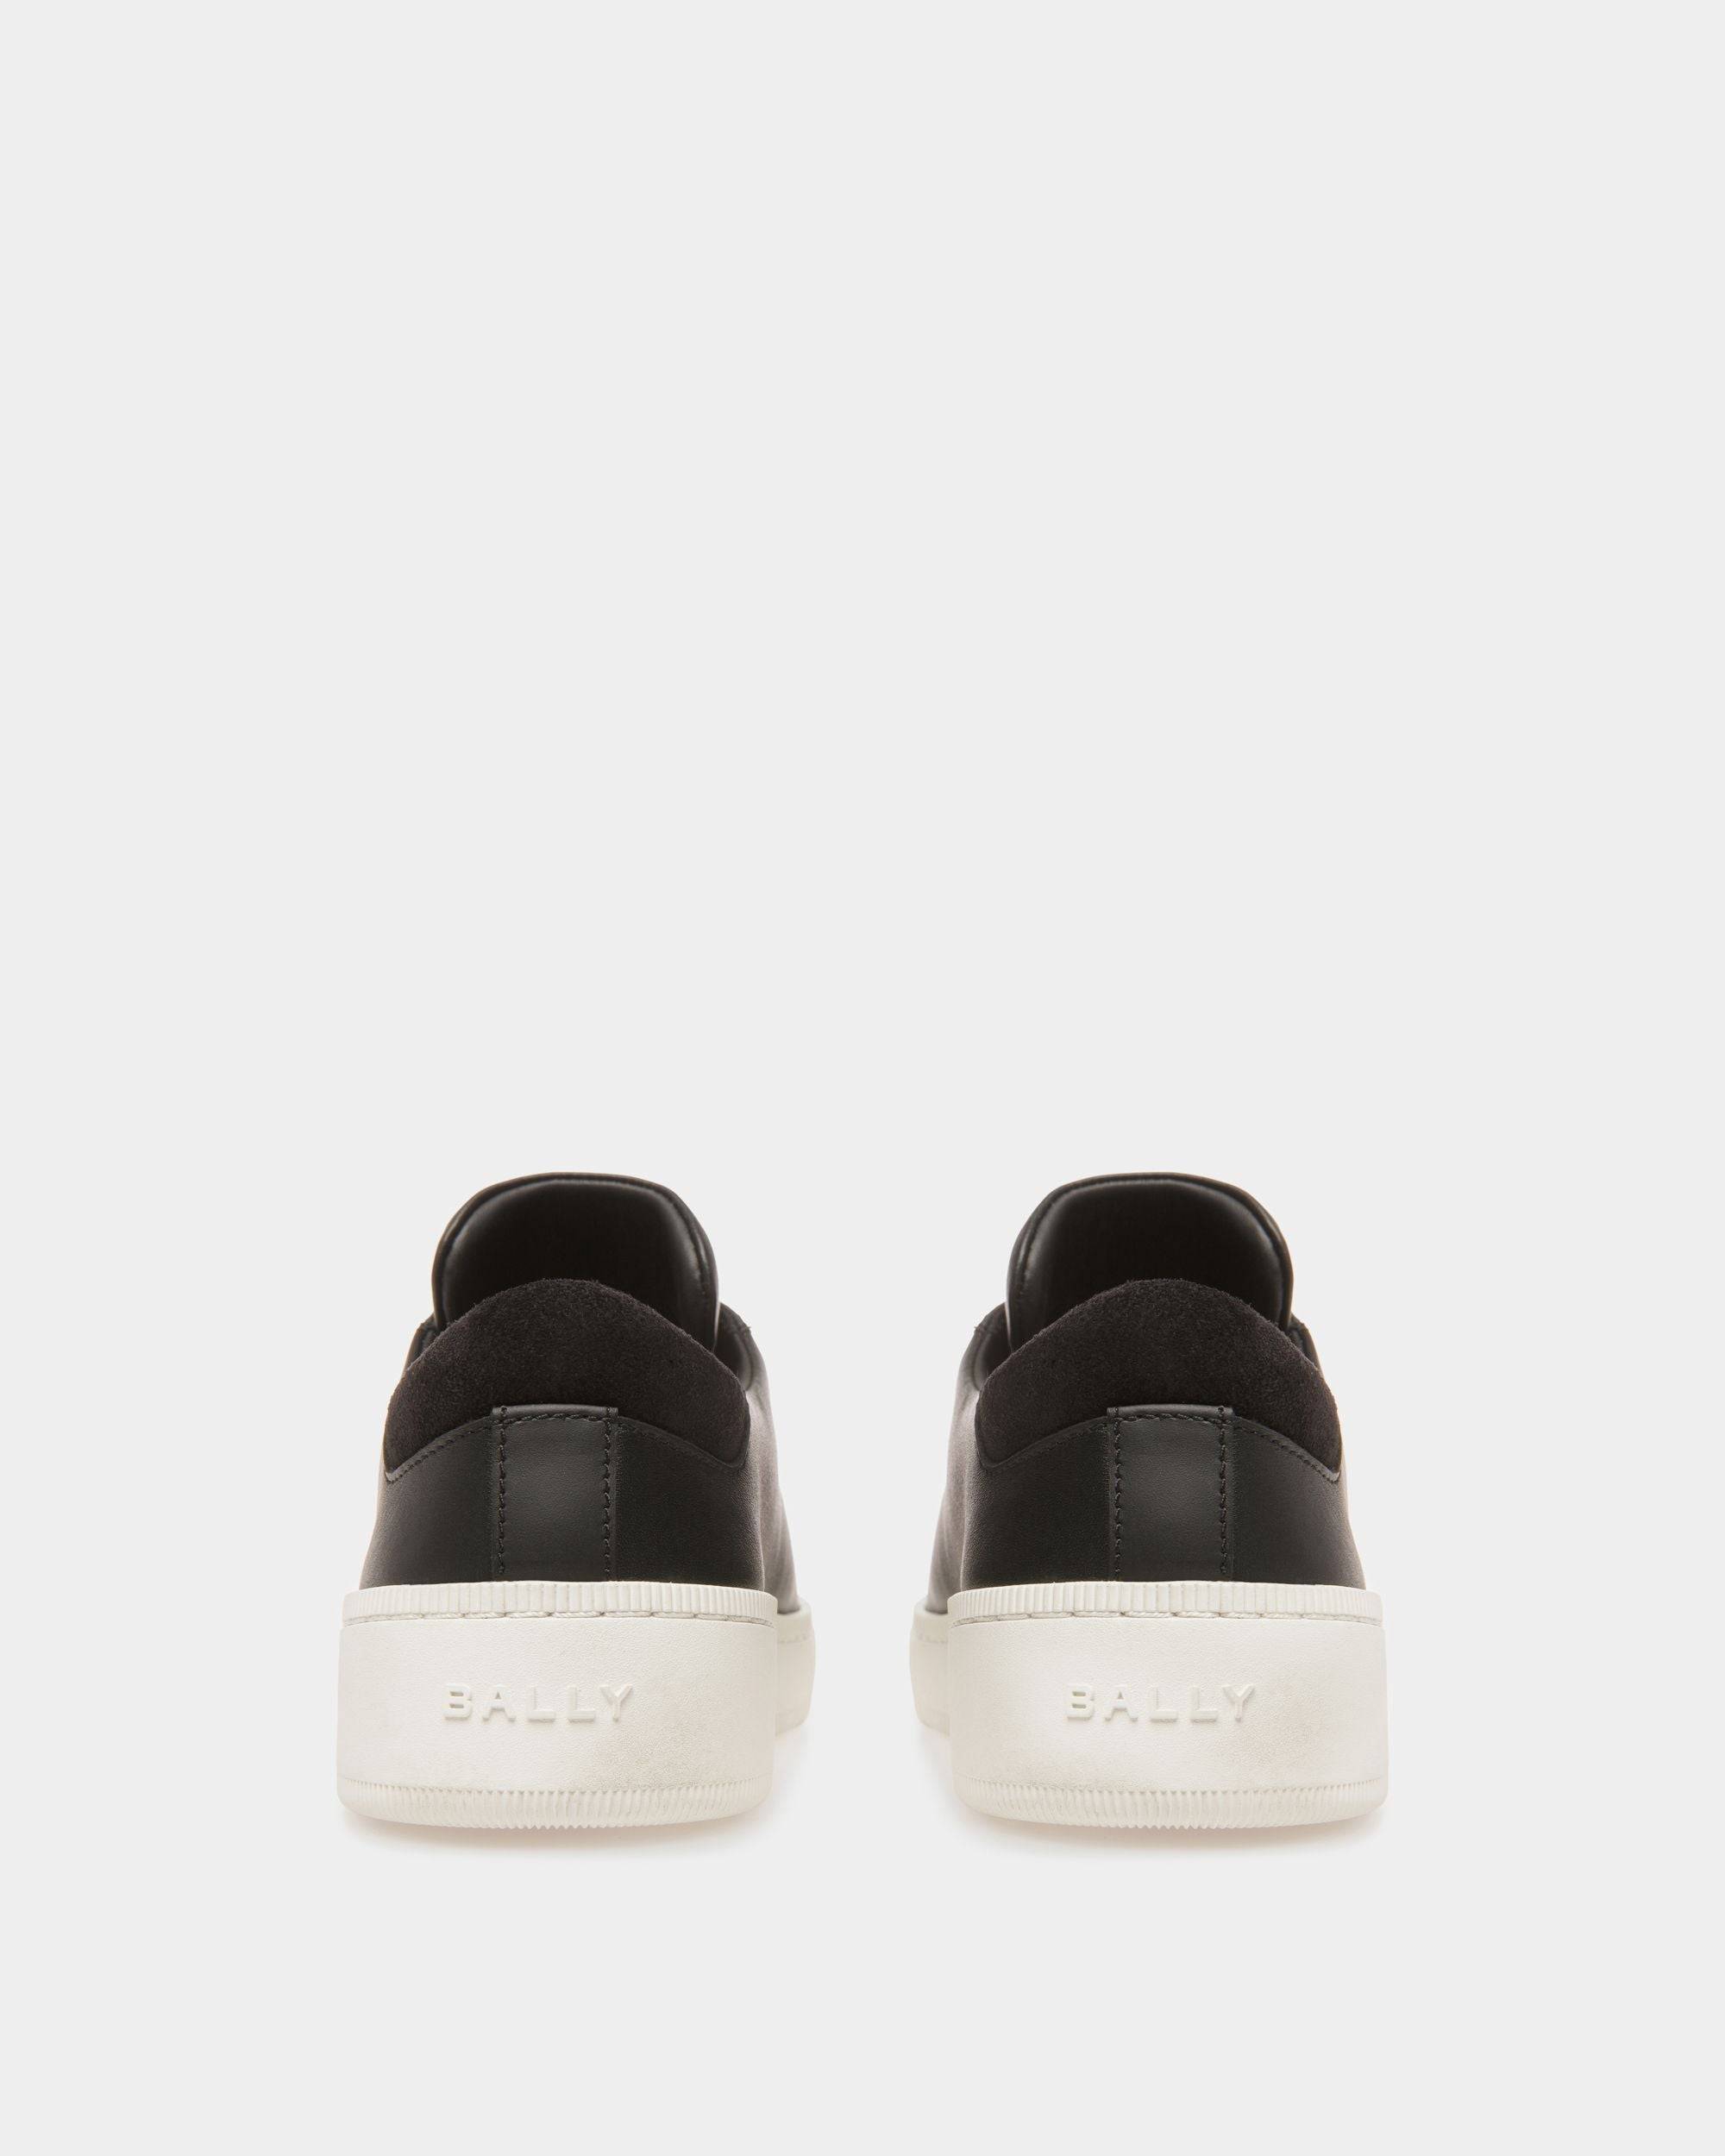 Women's Raise Sneakers In Black And White Leather | Bally